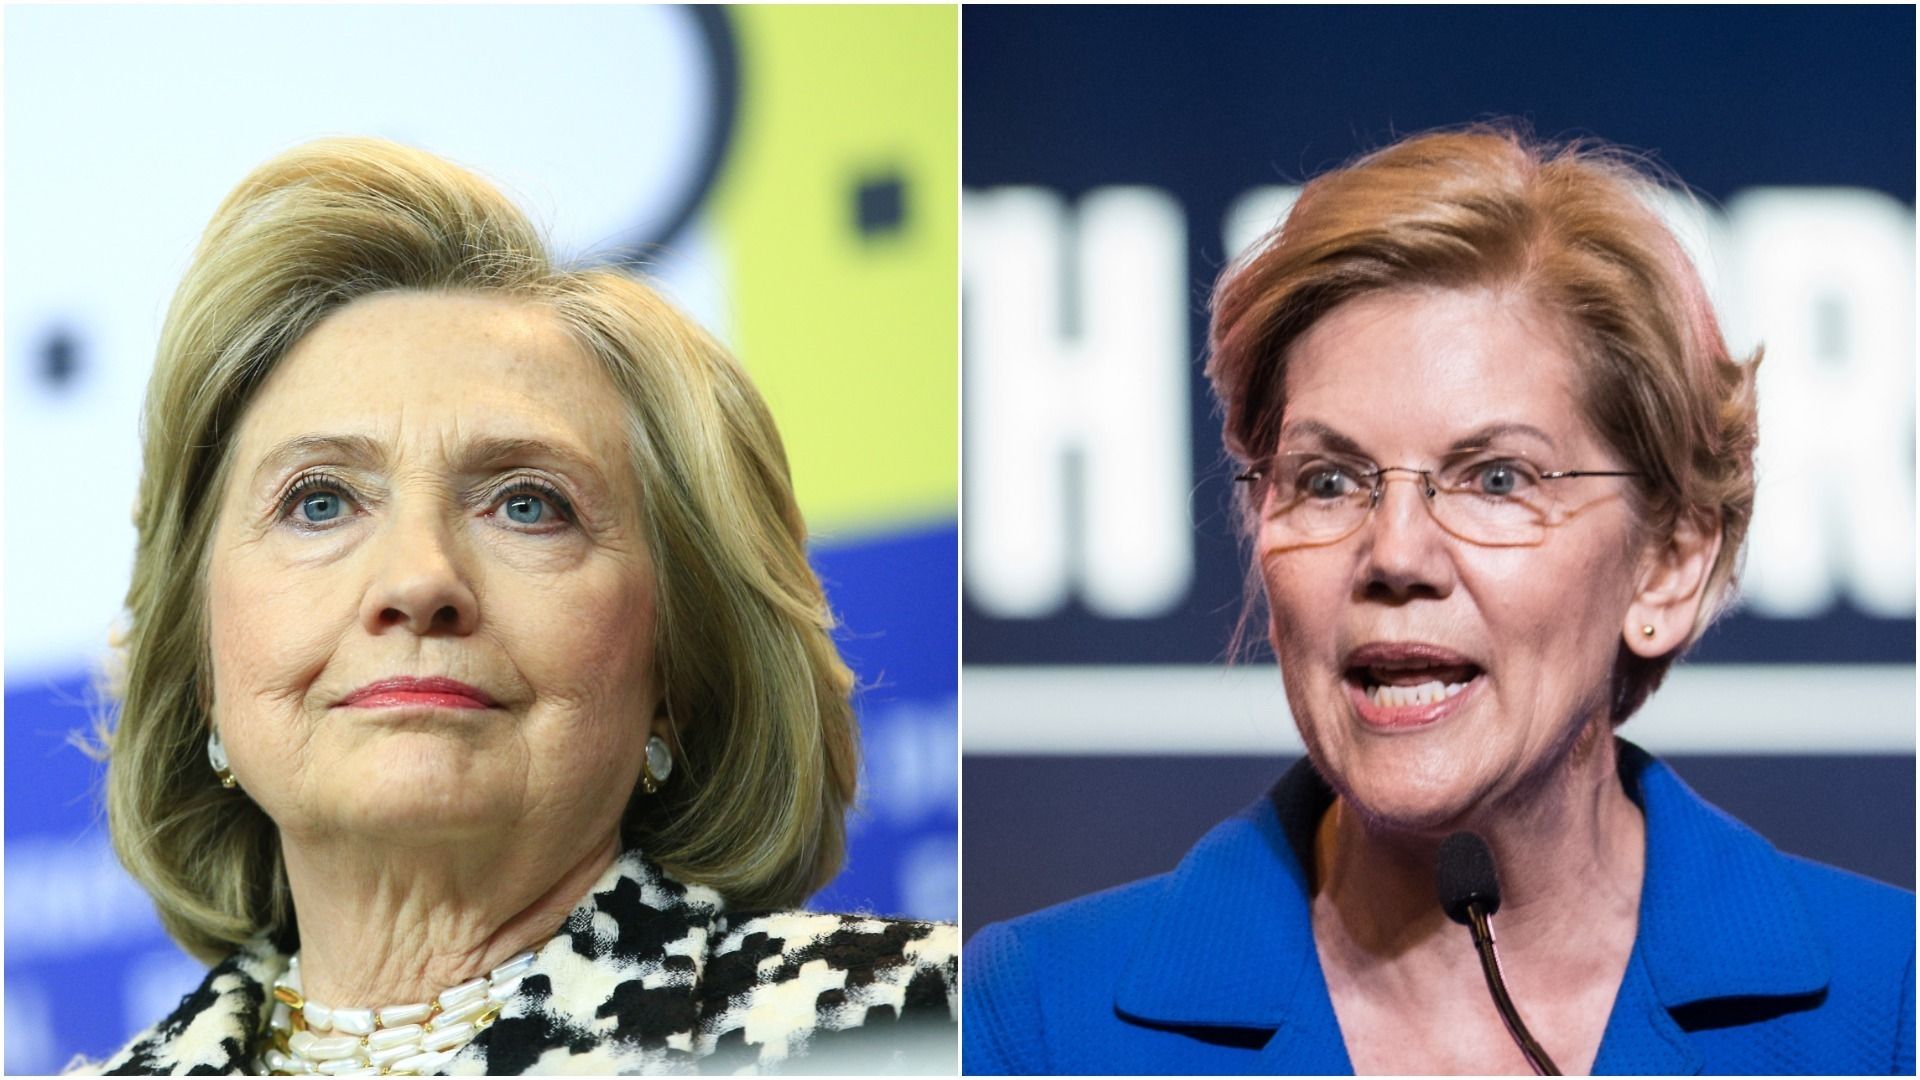 Side-by-side Images of the faces of Hillary Clinton and Elizabeth Warren 